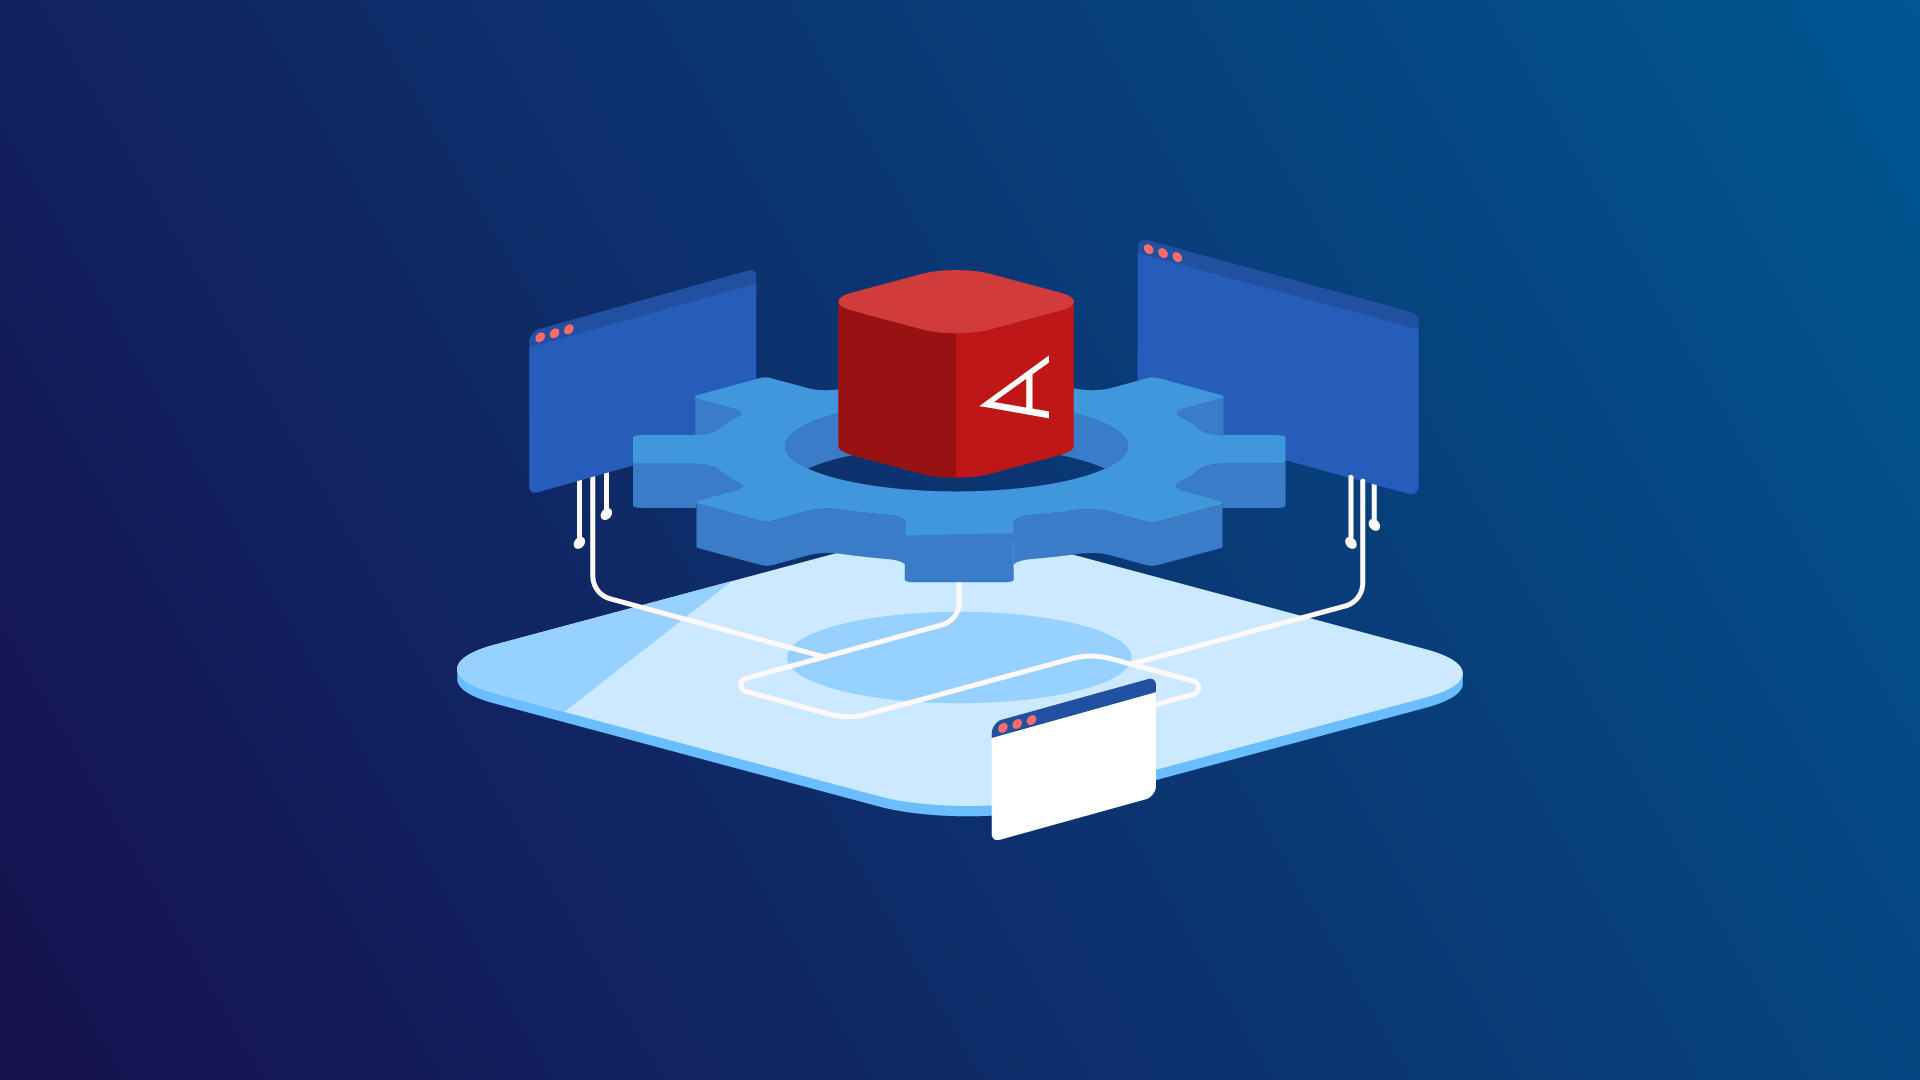 A floating red square with an A on its side floating over a vertical cog in an isometric database design illustration